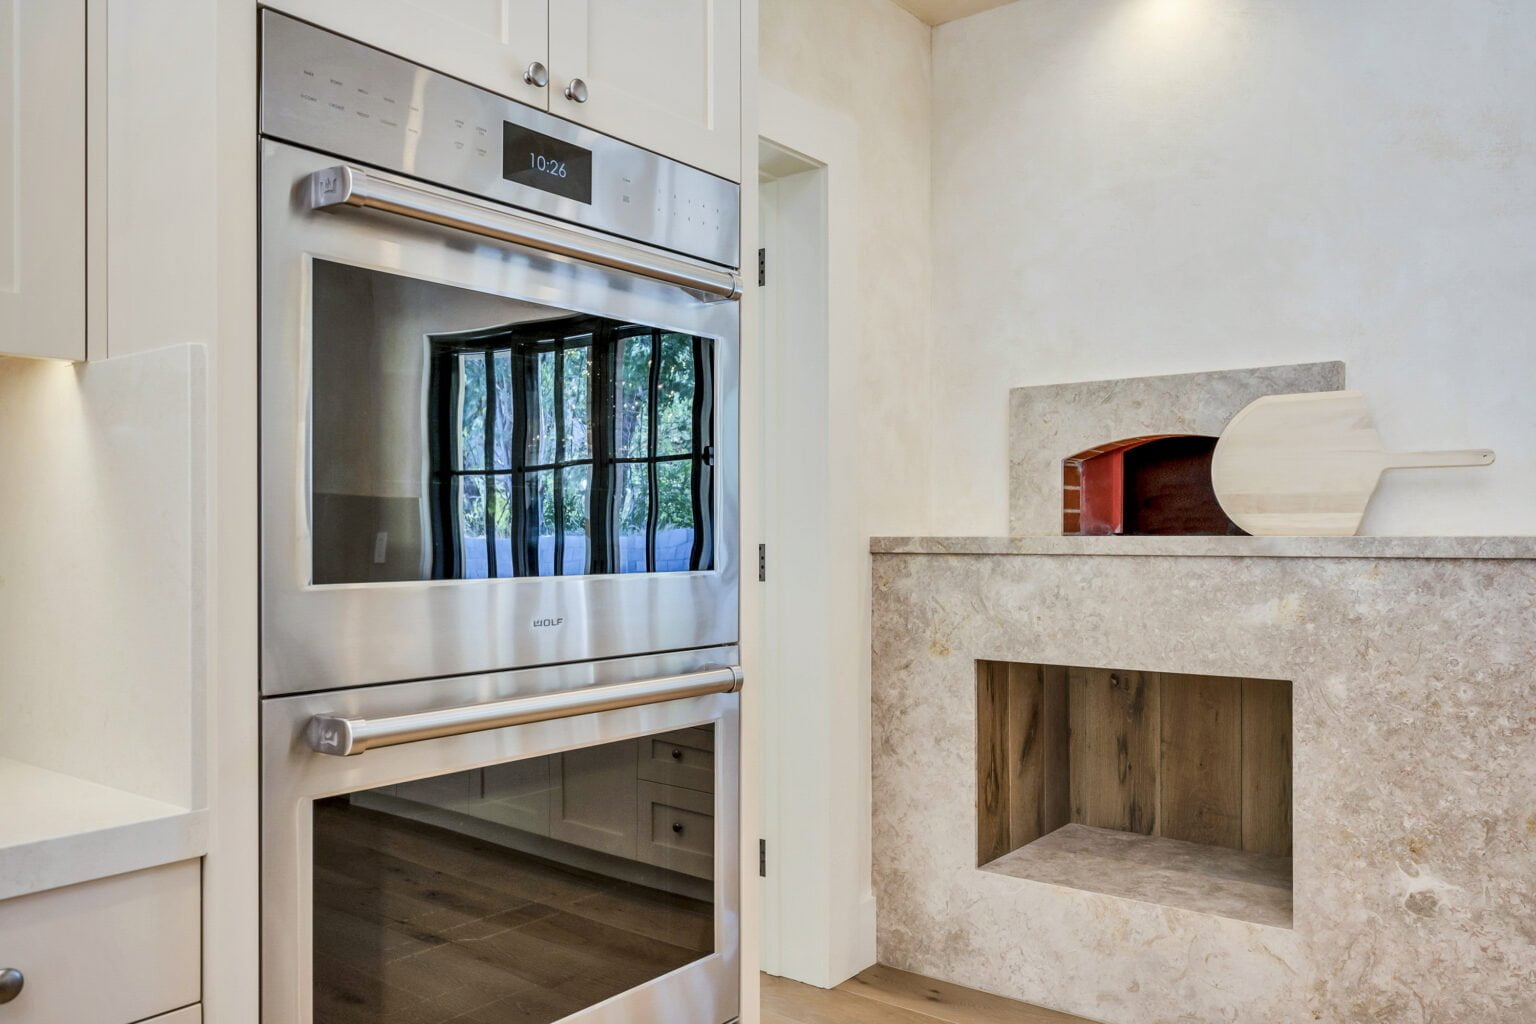 Electric and fire ovens in the corner of the kitchen of Santa Rosa Hills Custom Transitional Rebuild